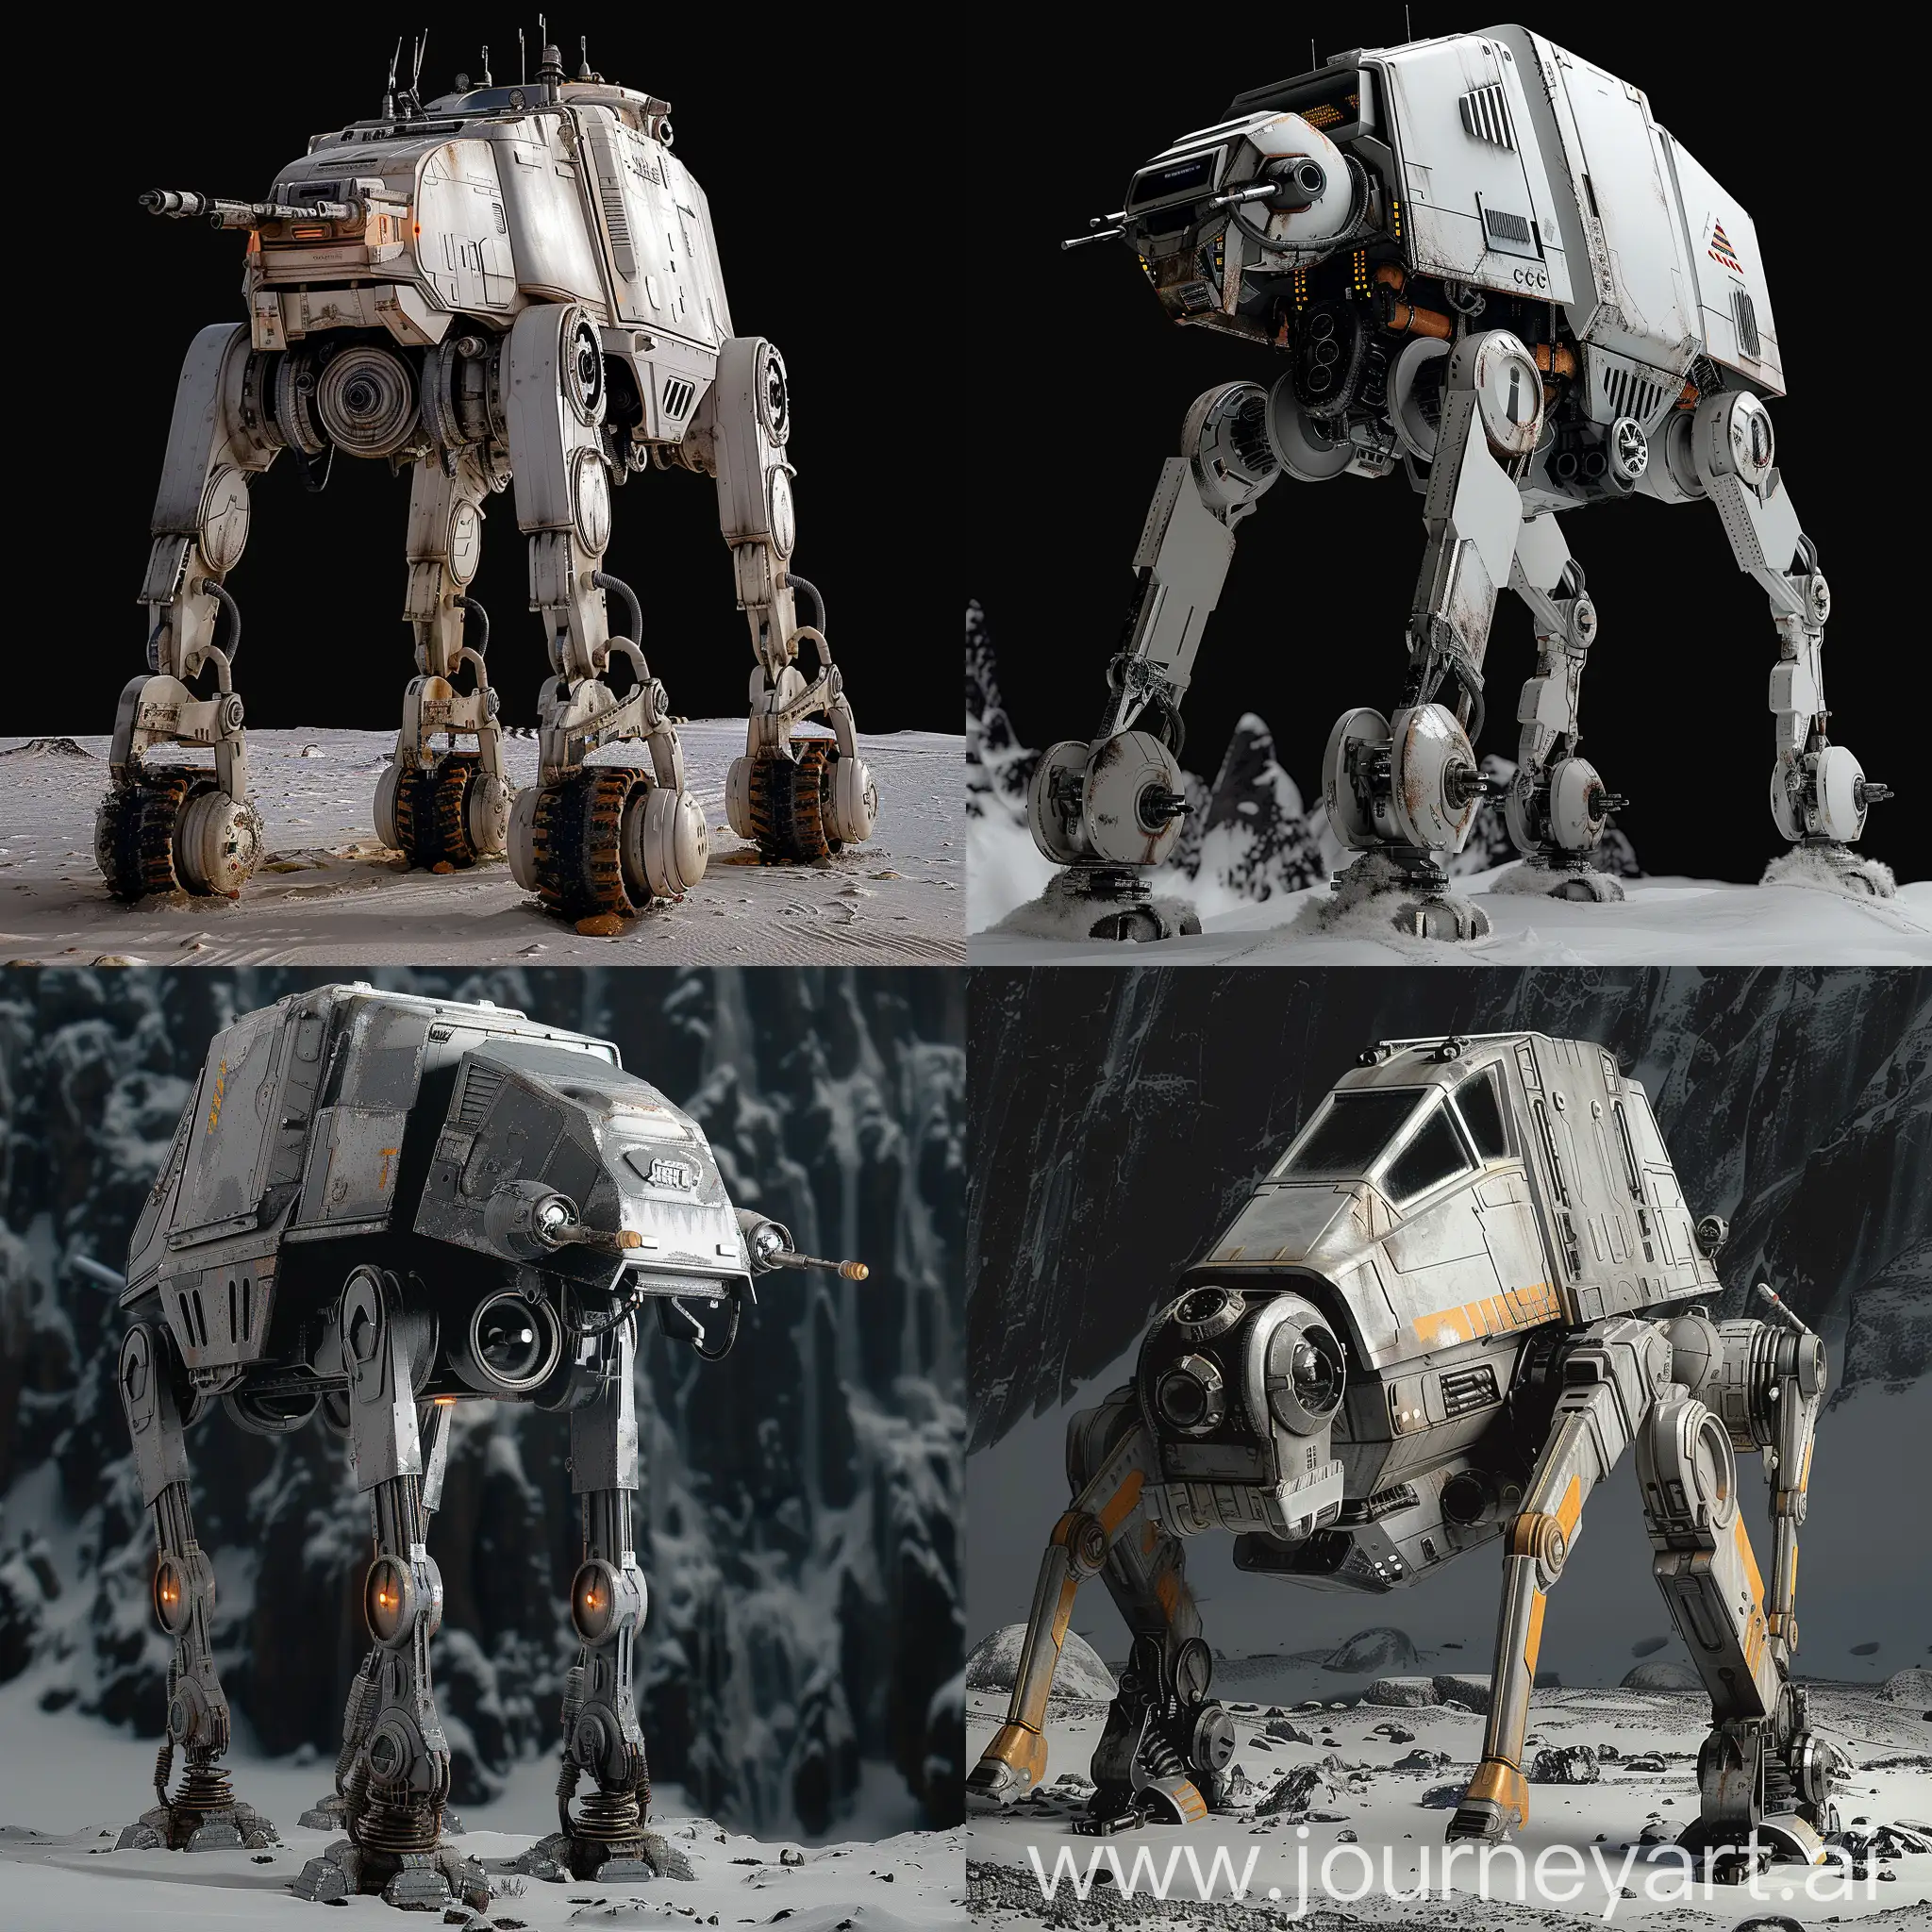 Futuristic-Star-Wars-All-Terrain-Scout-Transport-with-Adaptive-Camouflage-and-Energy-Shields